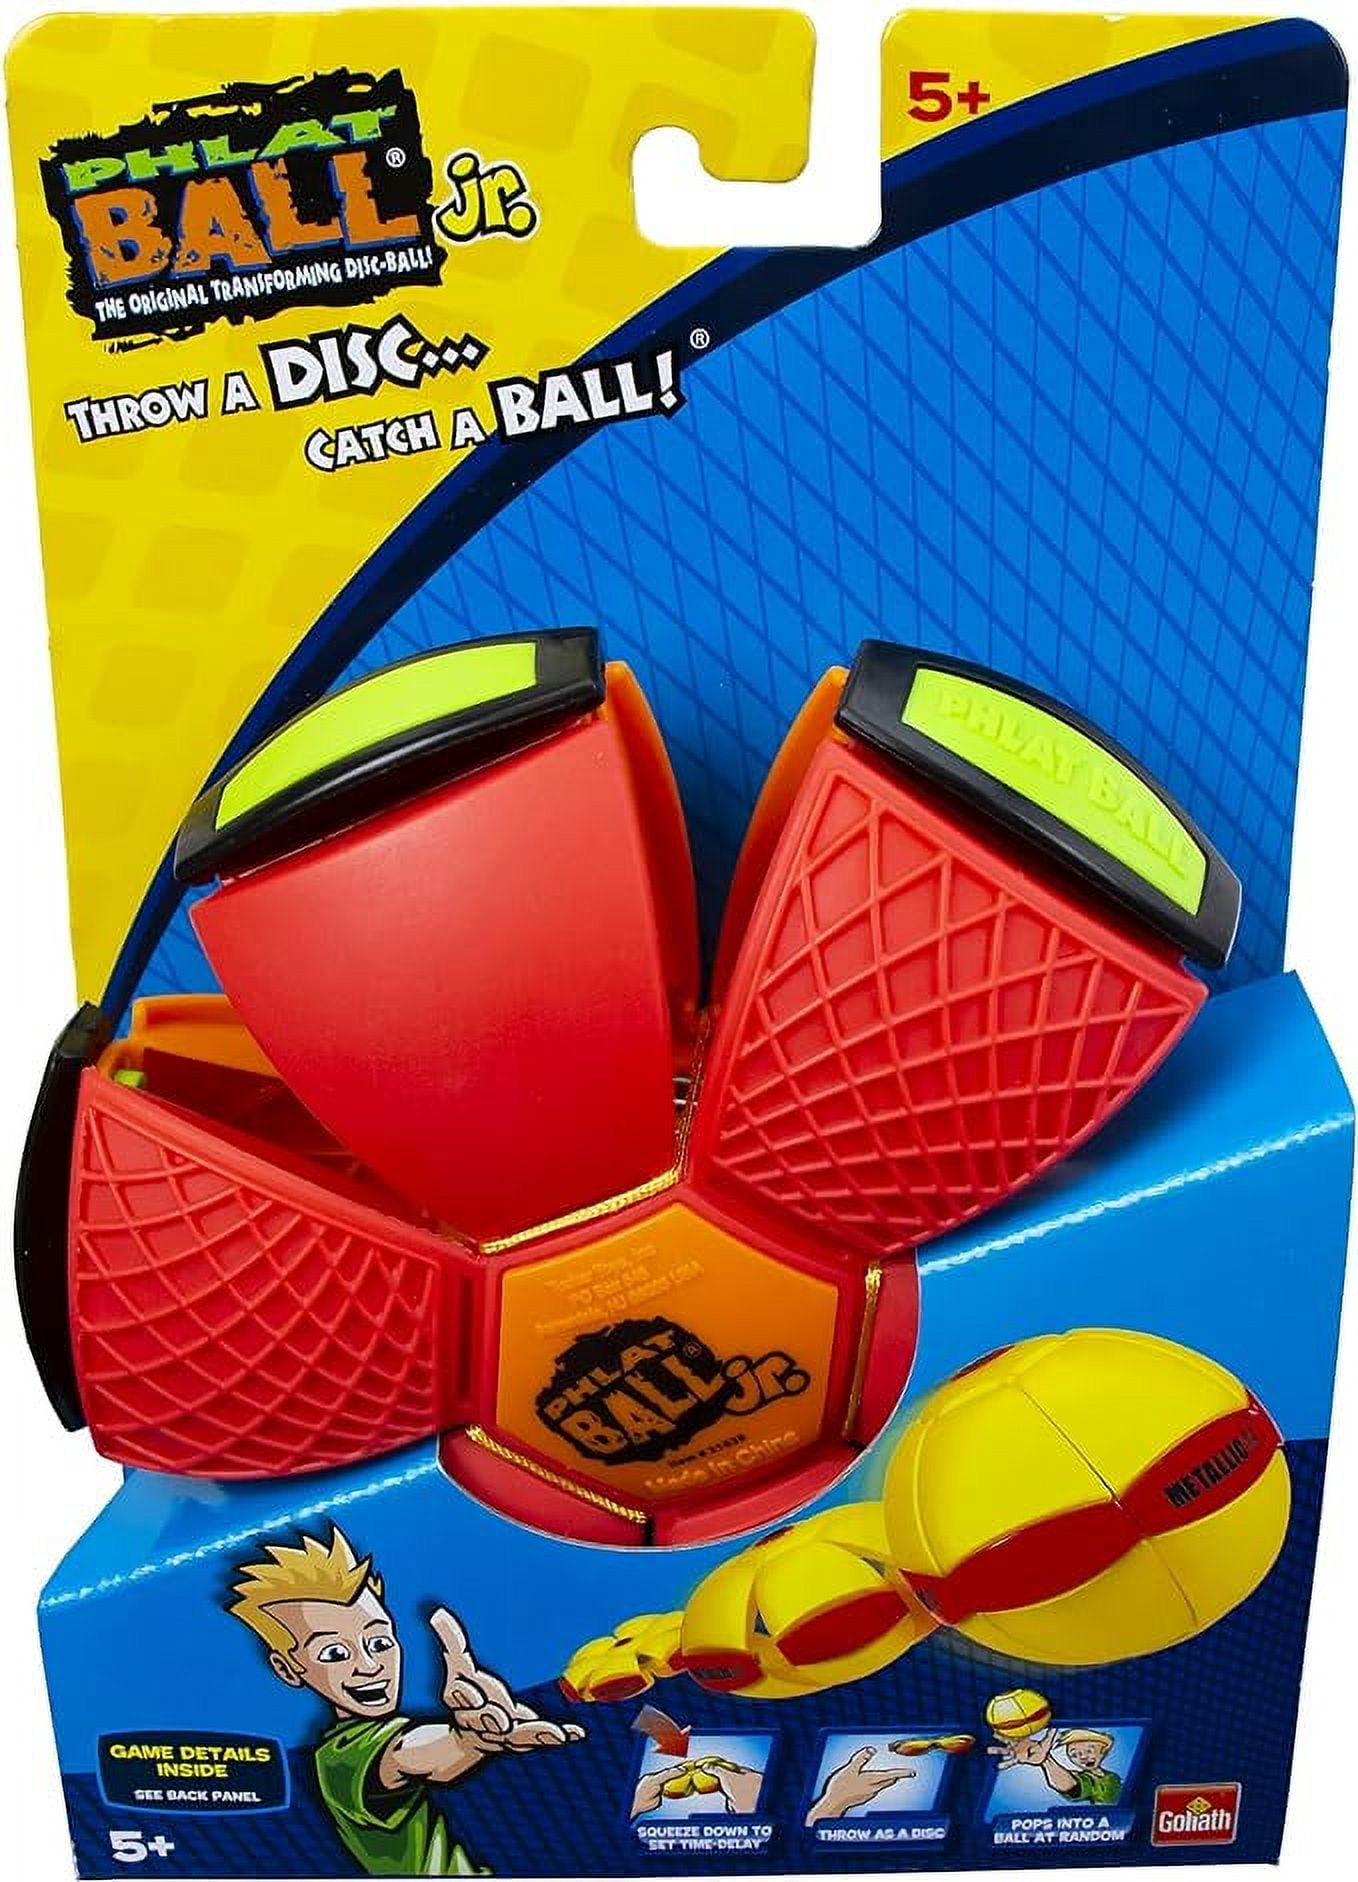  WAHU Phlat Ball Junior Flying Saucer Ball Toy for Kids